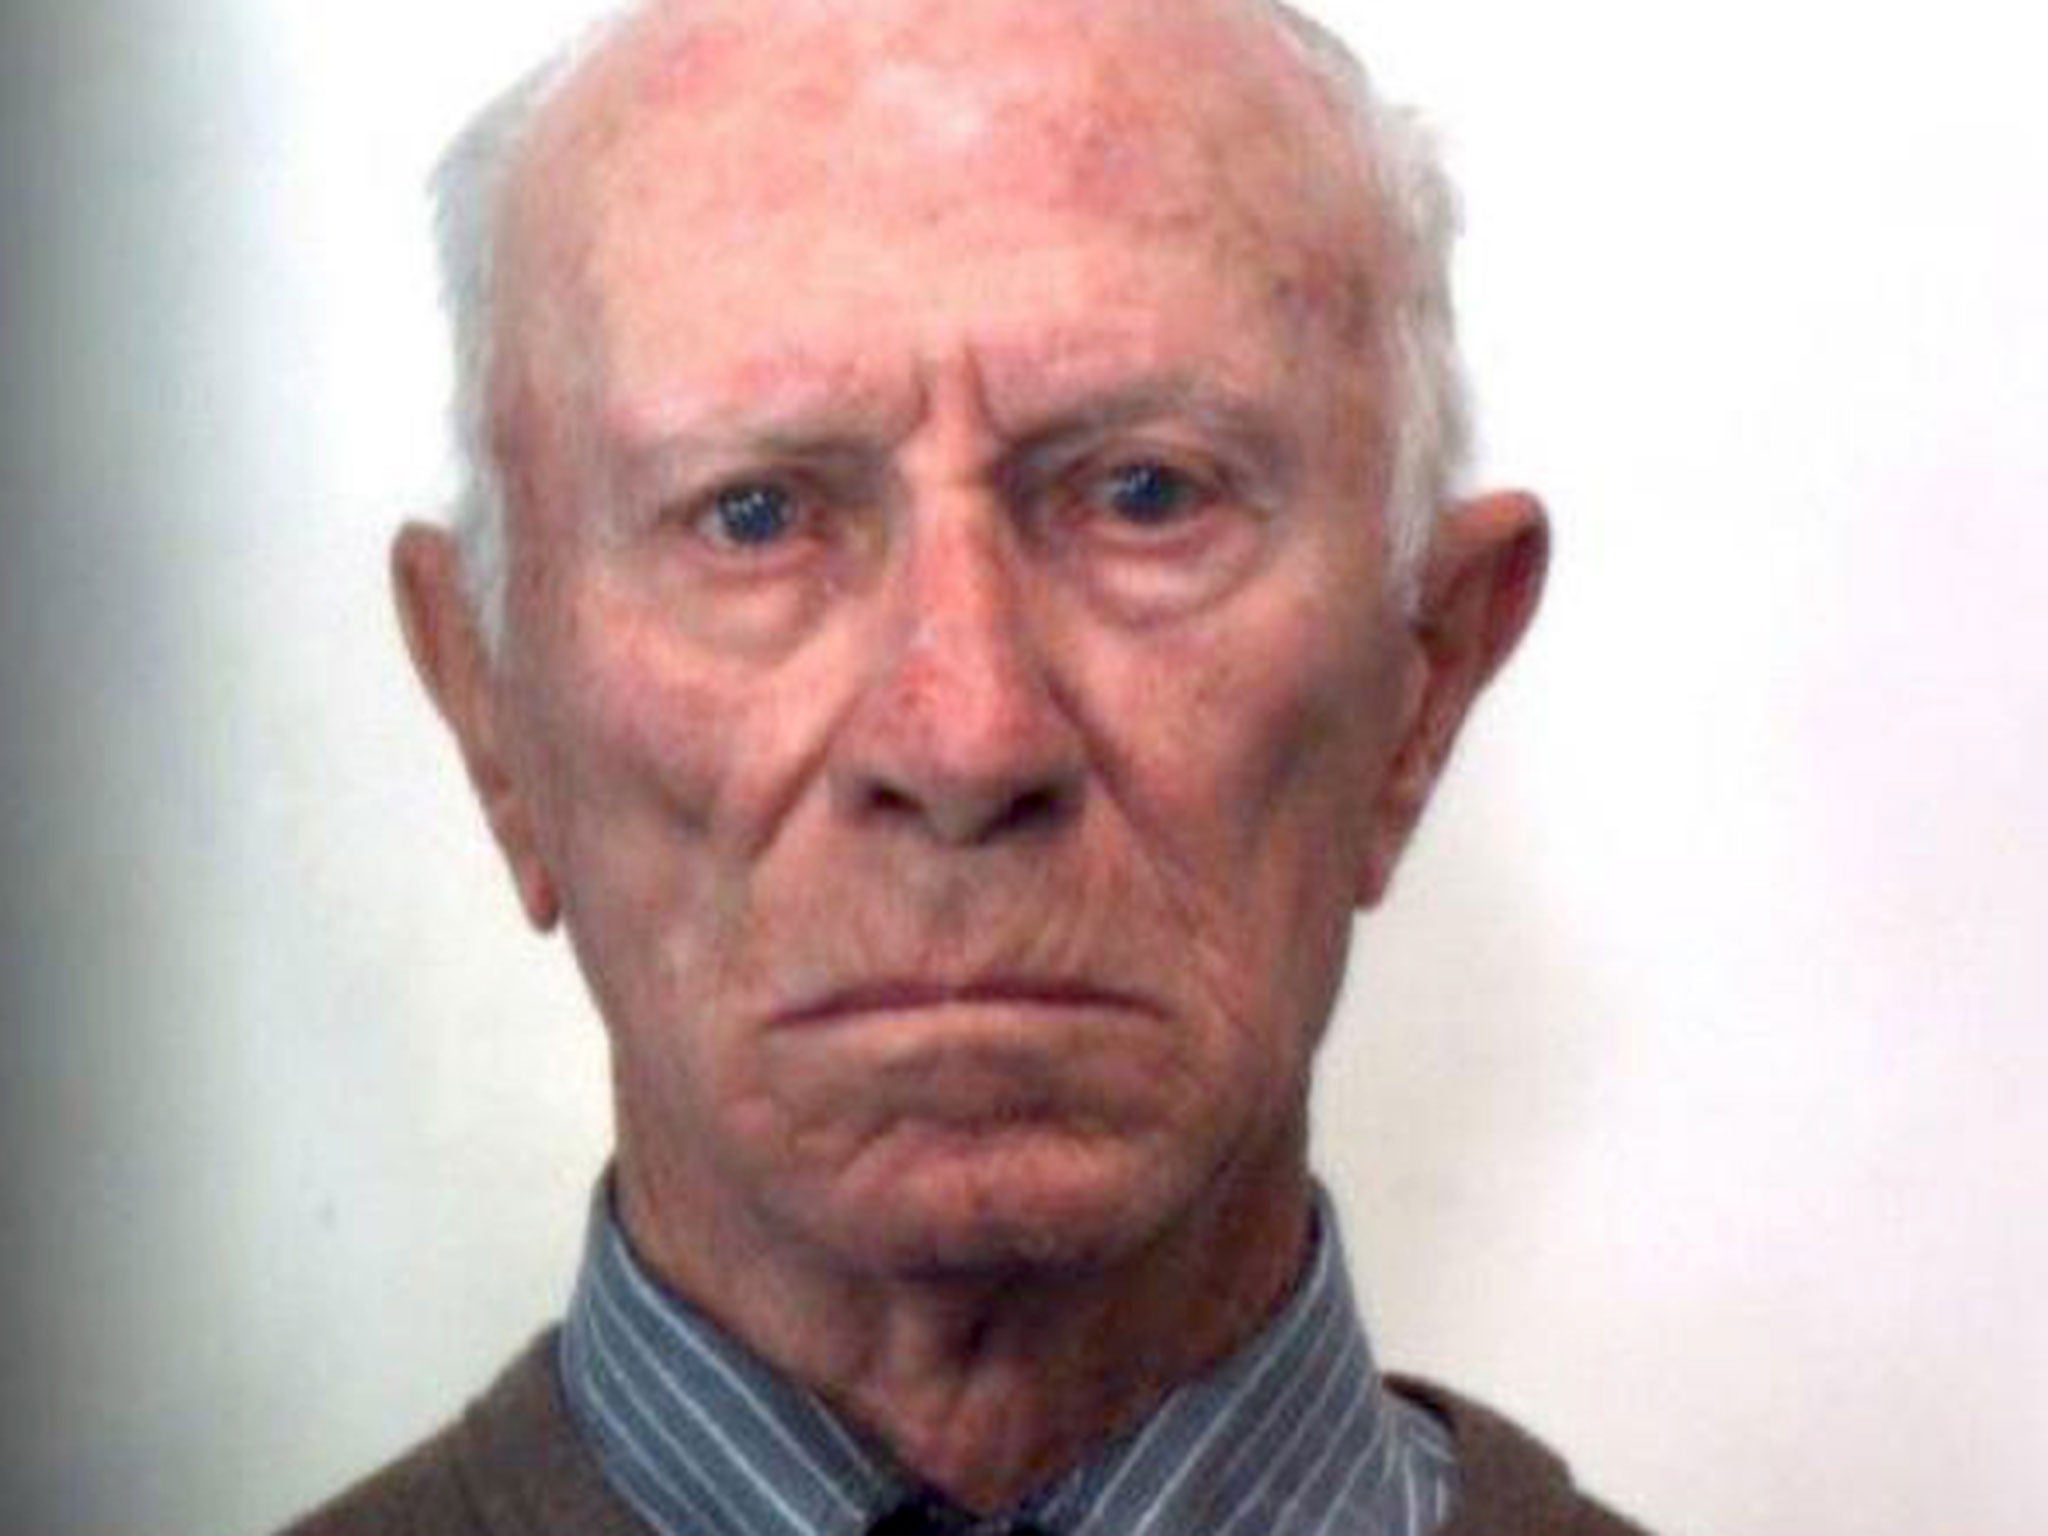 Ageing gangster Gregorio Agrigento, 81, was arrested on extortion and arms charges